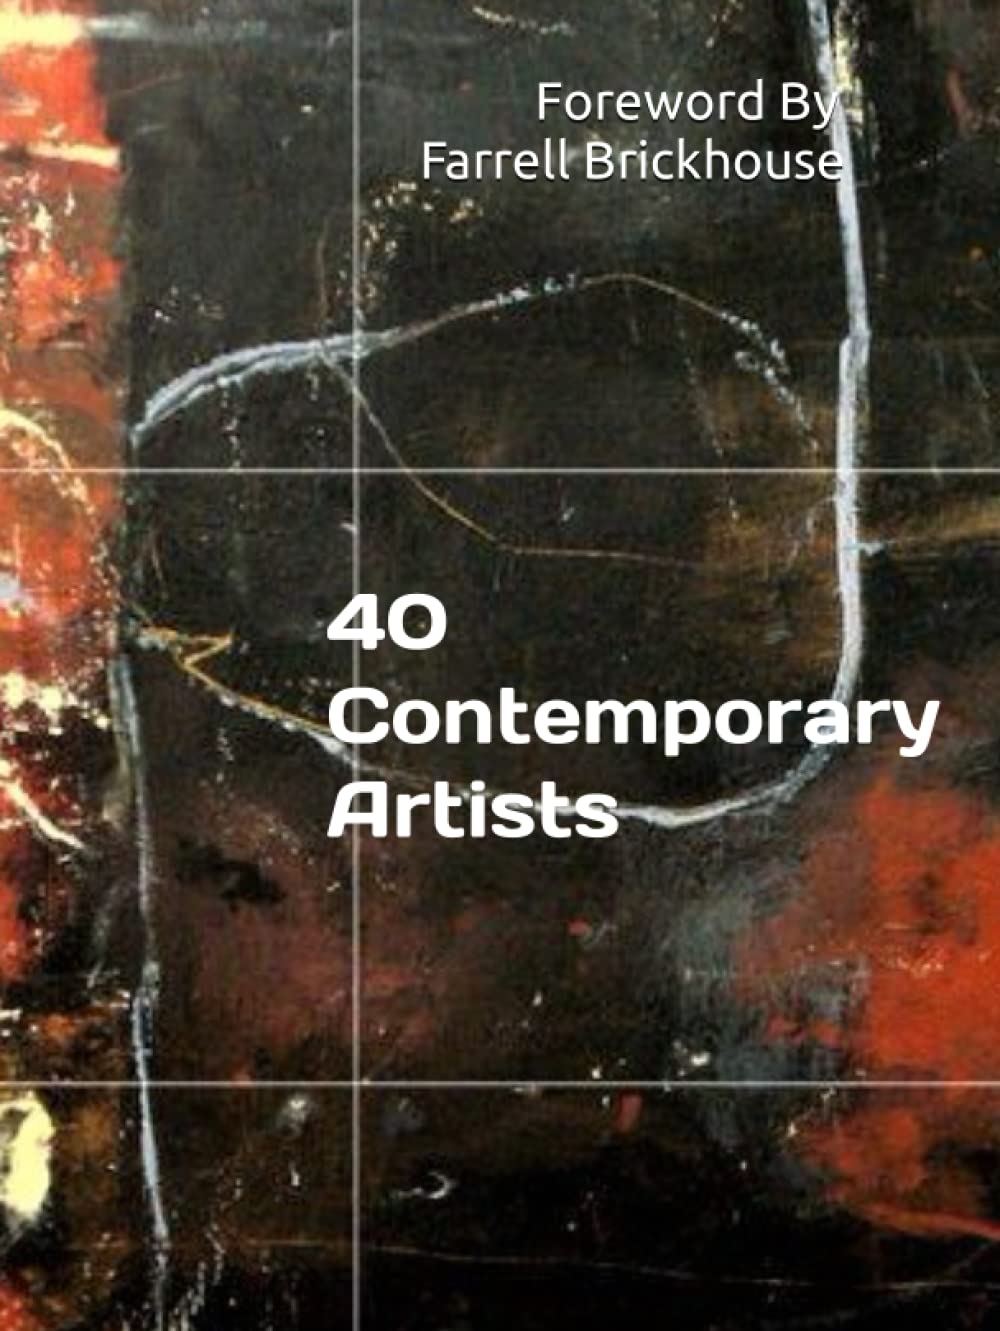 40 Contemporary Artists: Foreword By Farrell Brickhouse Hardcover 99 pages